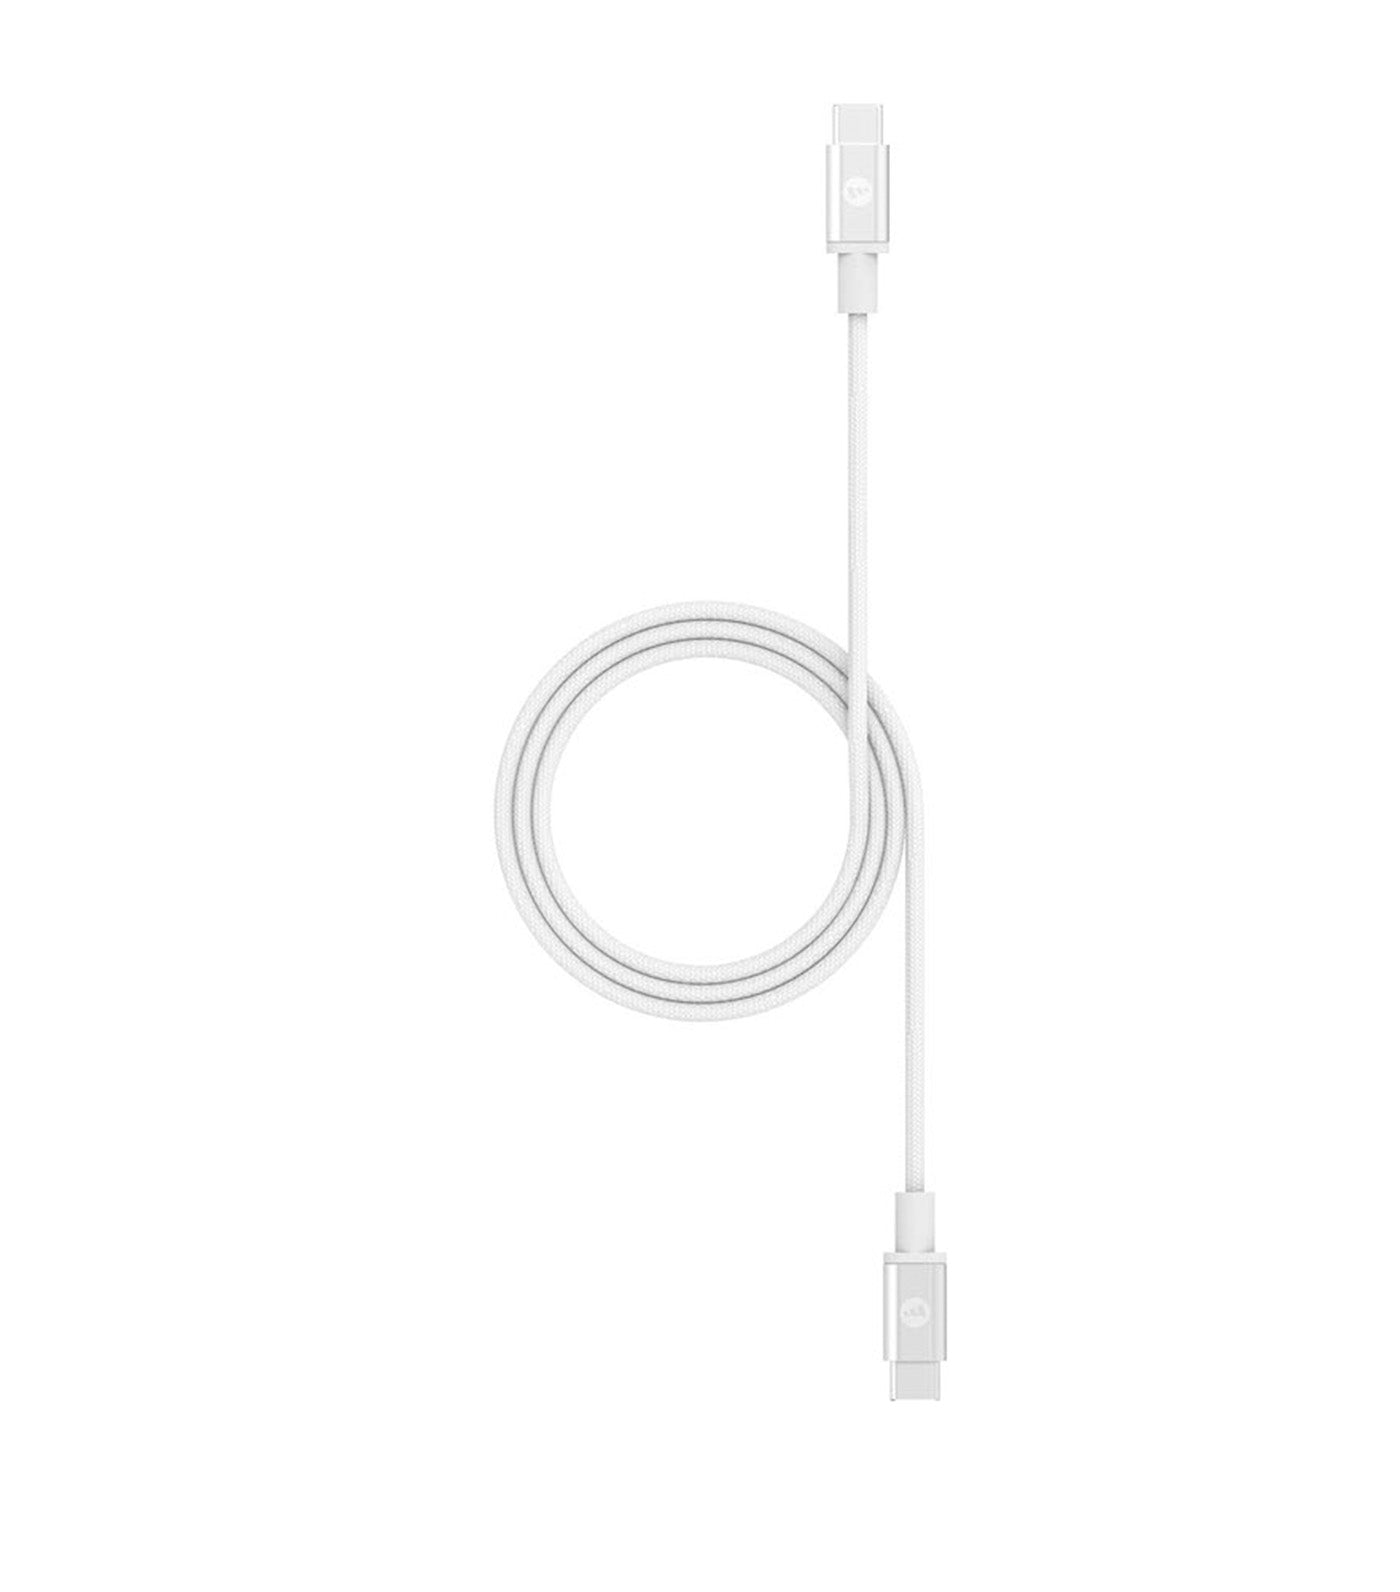 mophie USB-C Cable with USB-C Connector (3 m)